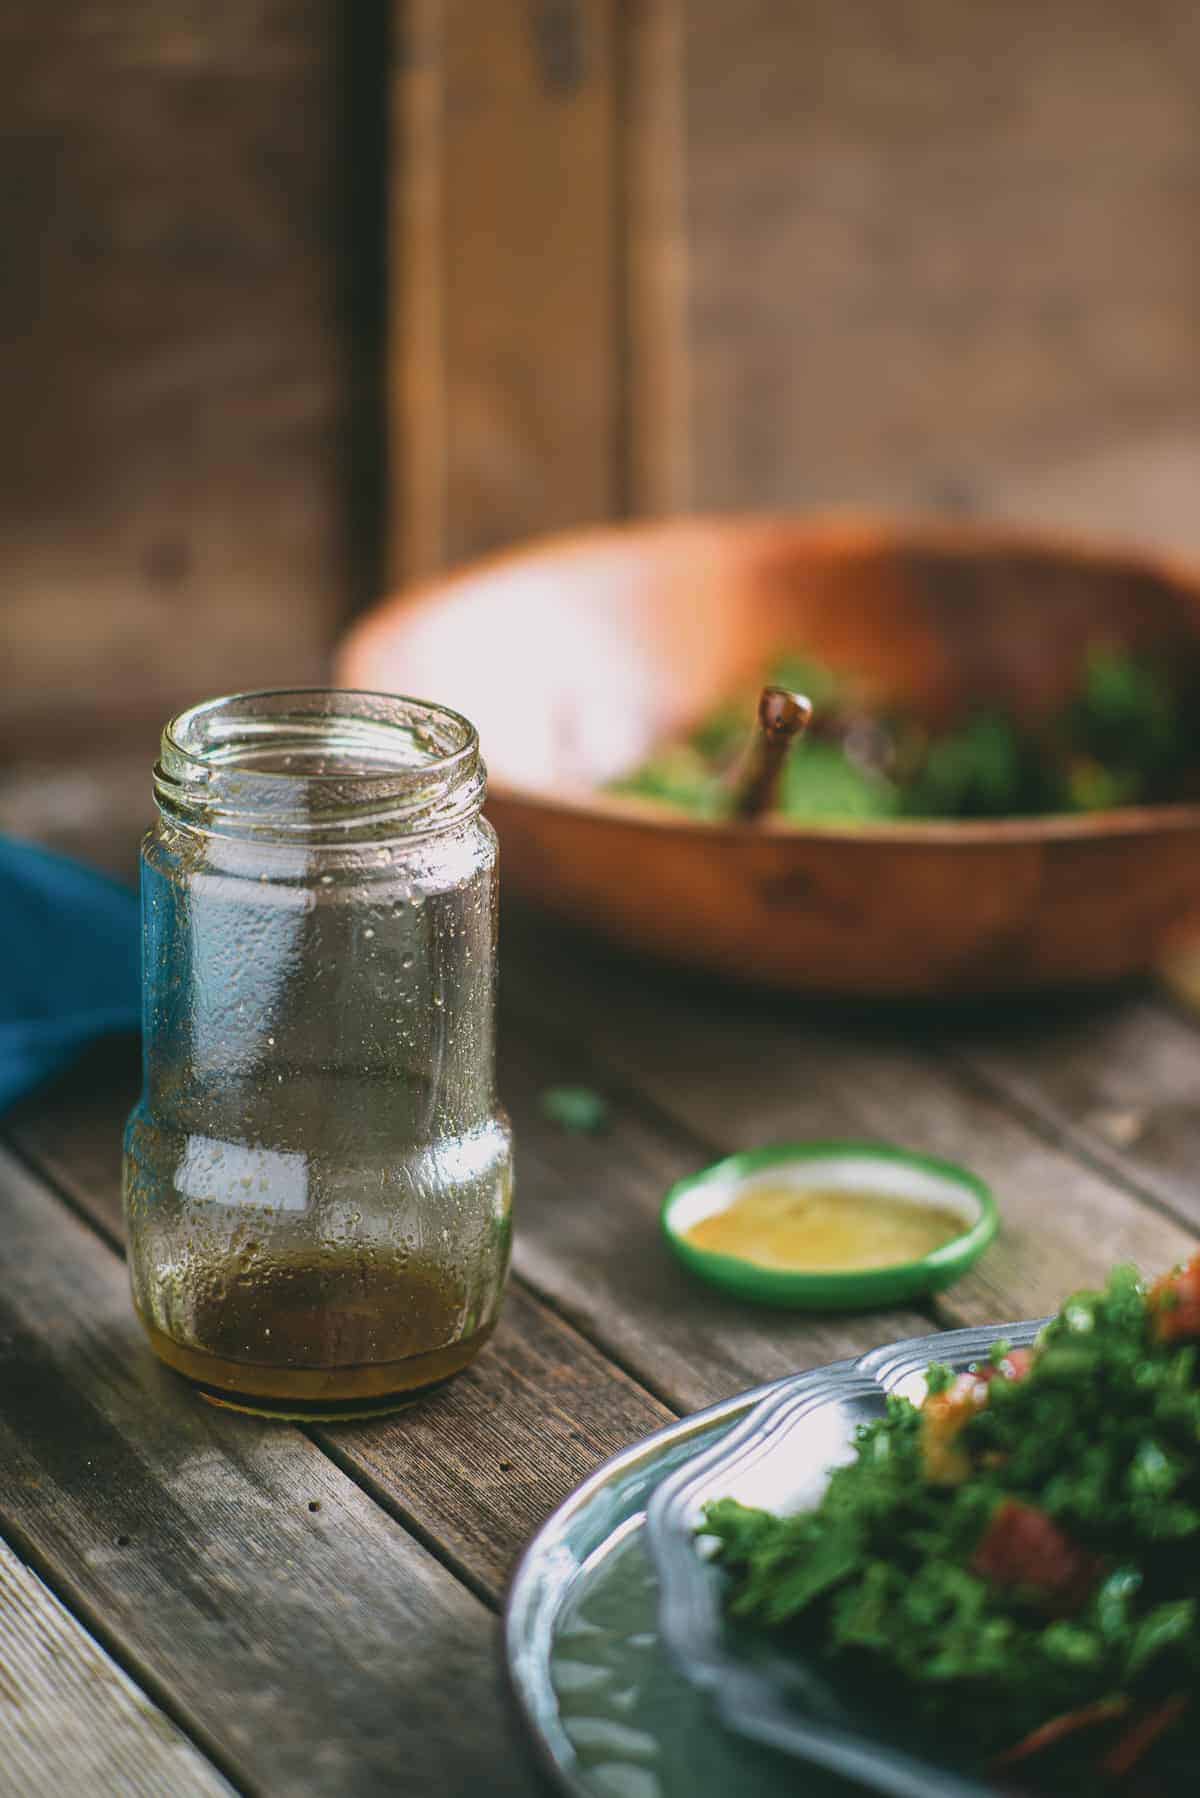 a half used jar of salad dressing on a table with a bowl of salt next to it